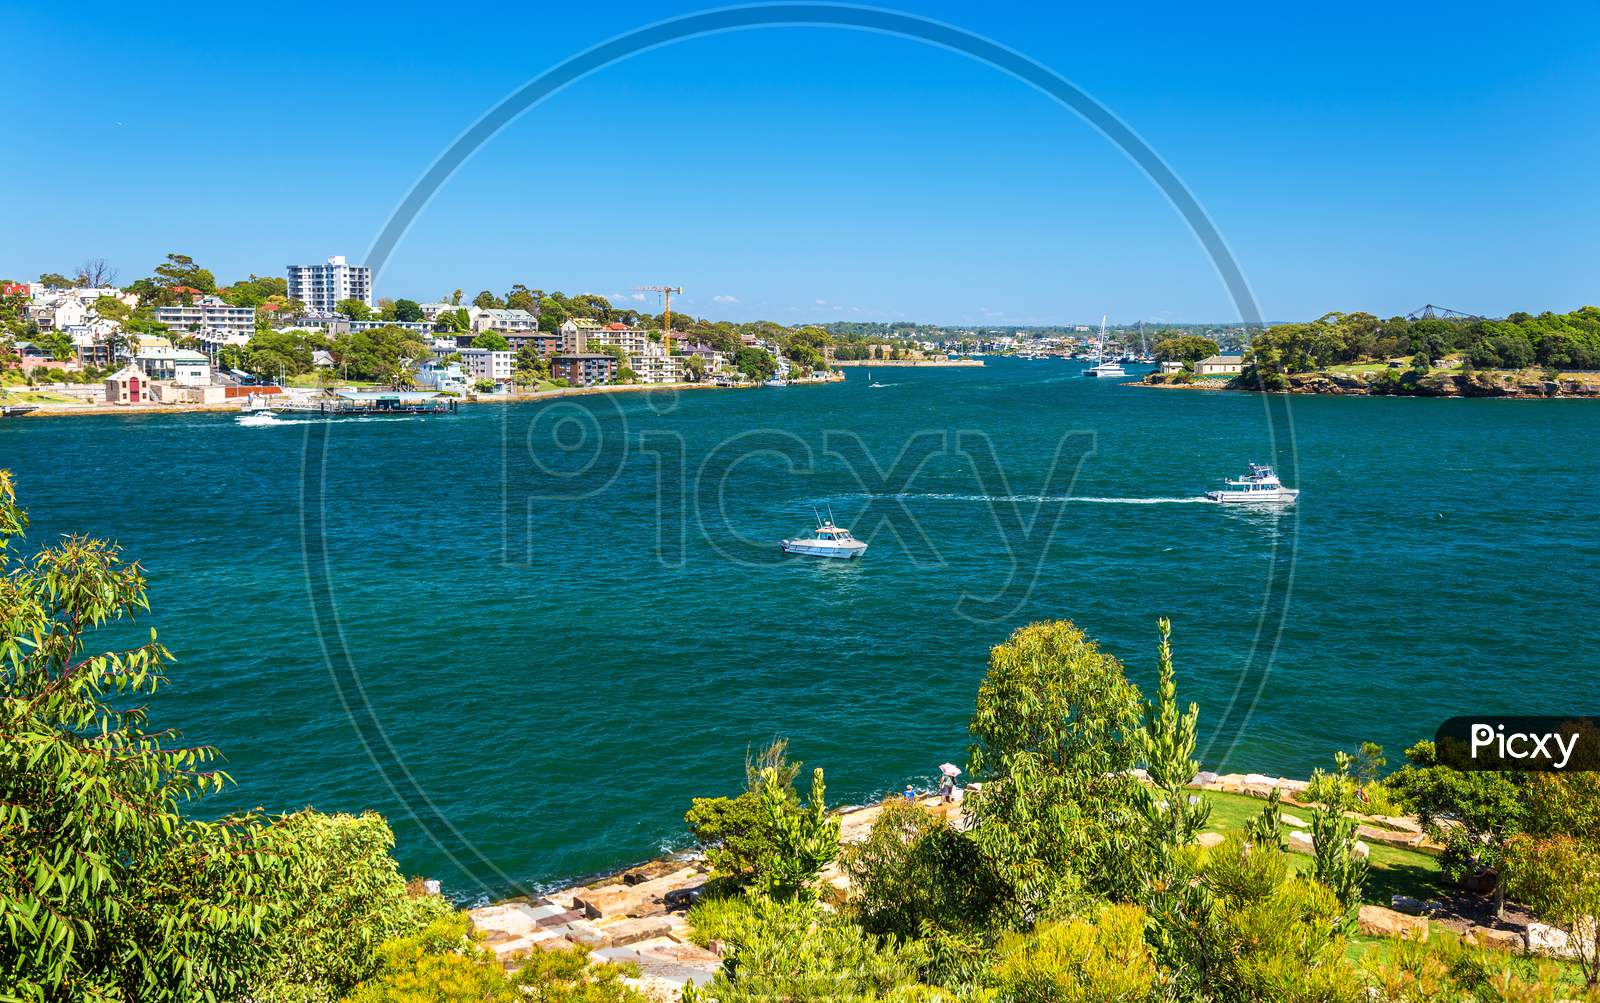 Yachts In Sydney Harbour As Seen From Barangaroo Reserve Park